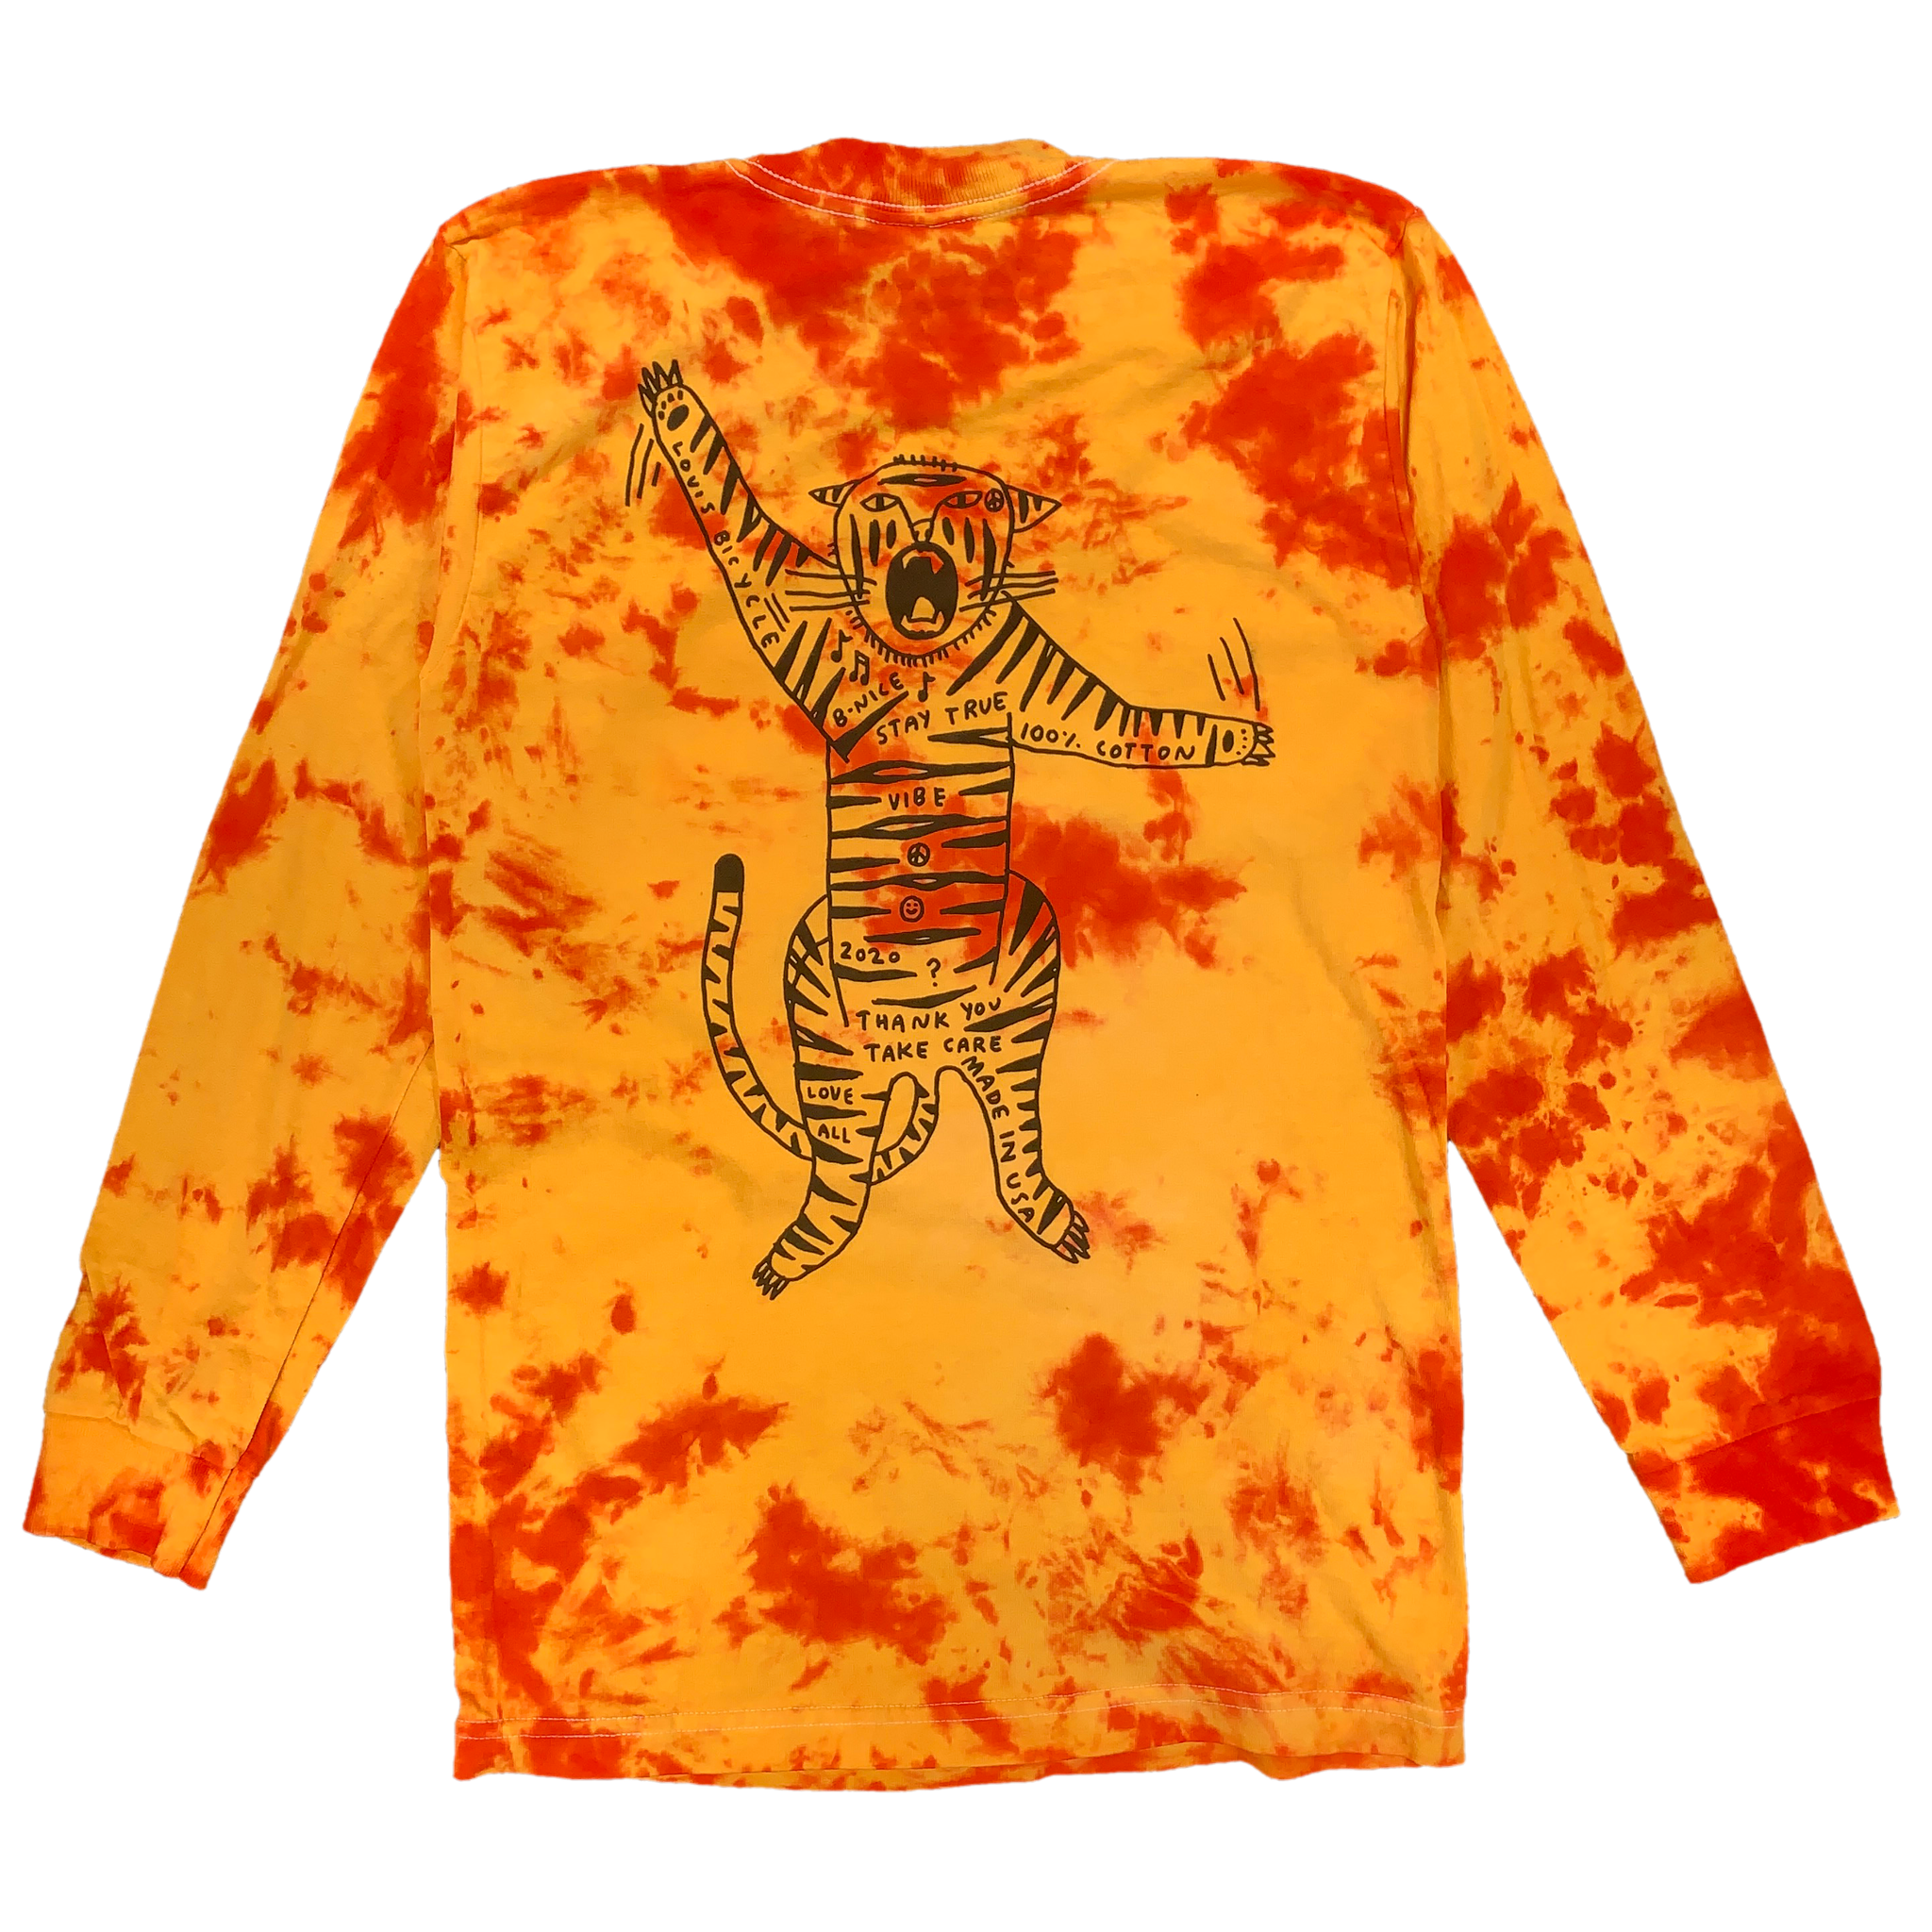 Hand dyed and screen printed long sleeve pocket tee - <strike>S</strike> <strike>M</strike> <strike>L</strike> <strike>XL</strike> <strike>2XL</strike>